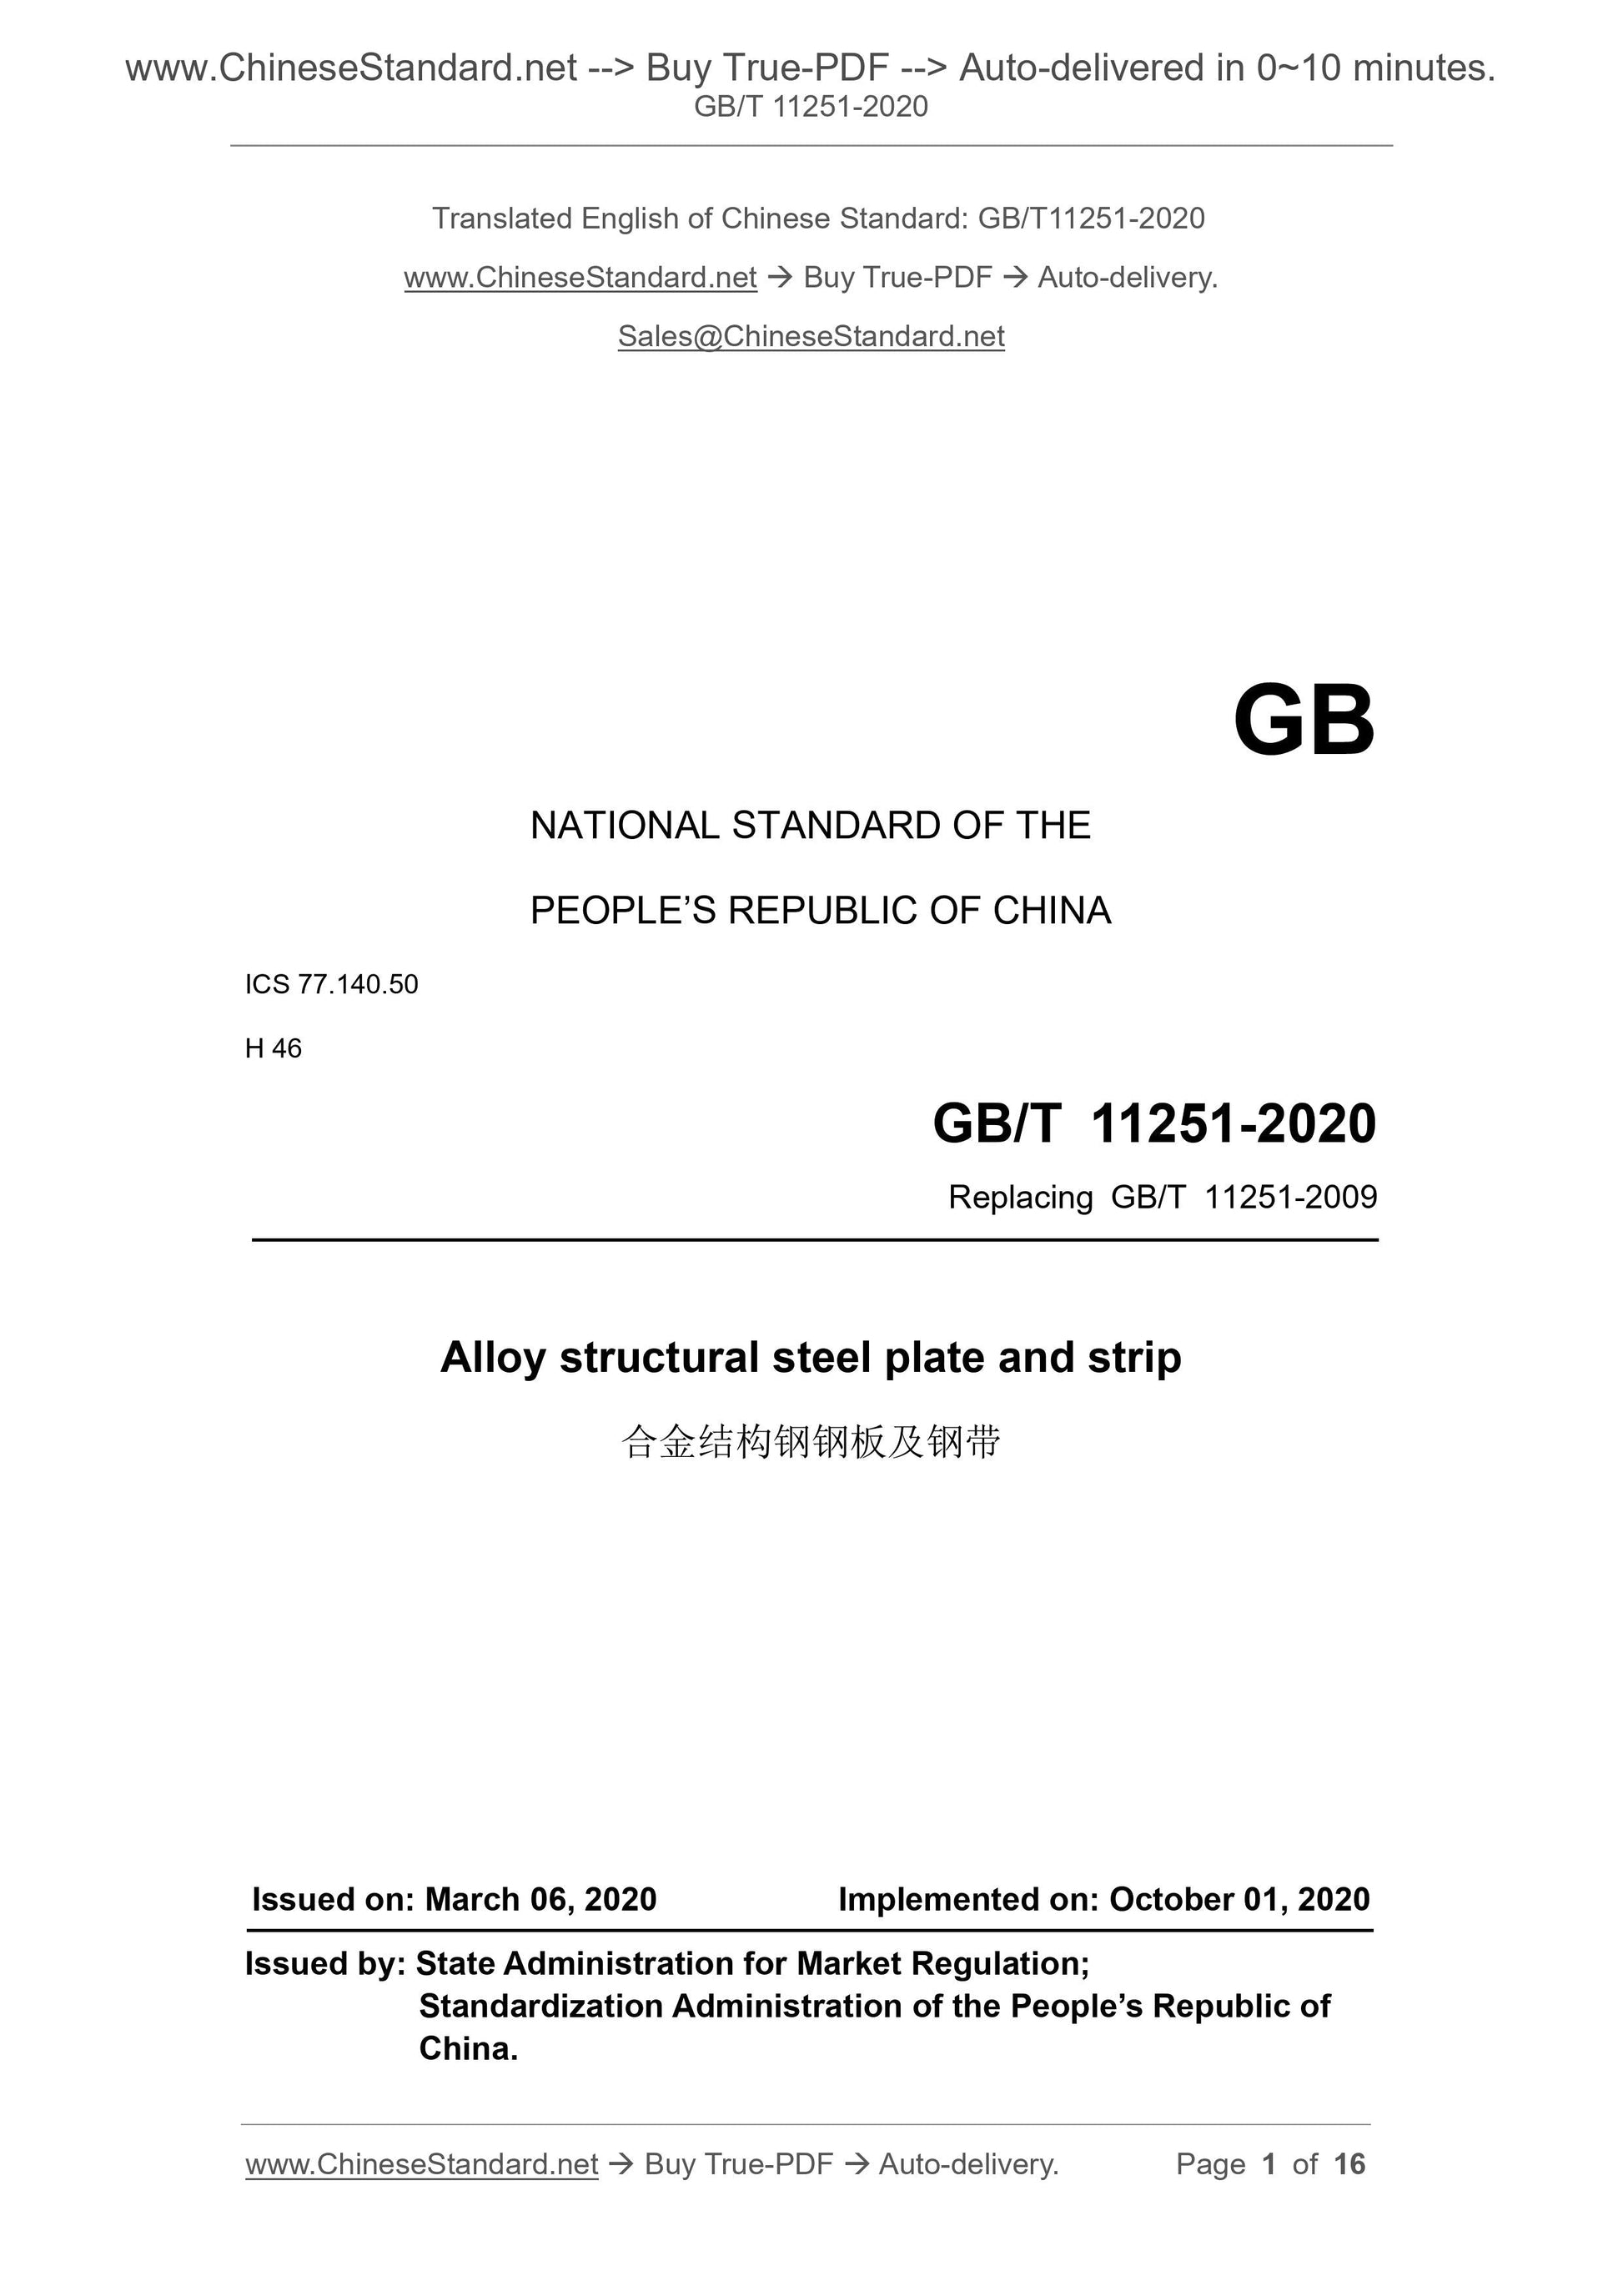 GB/T 11251-2020 Page 1